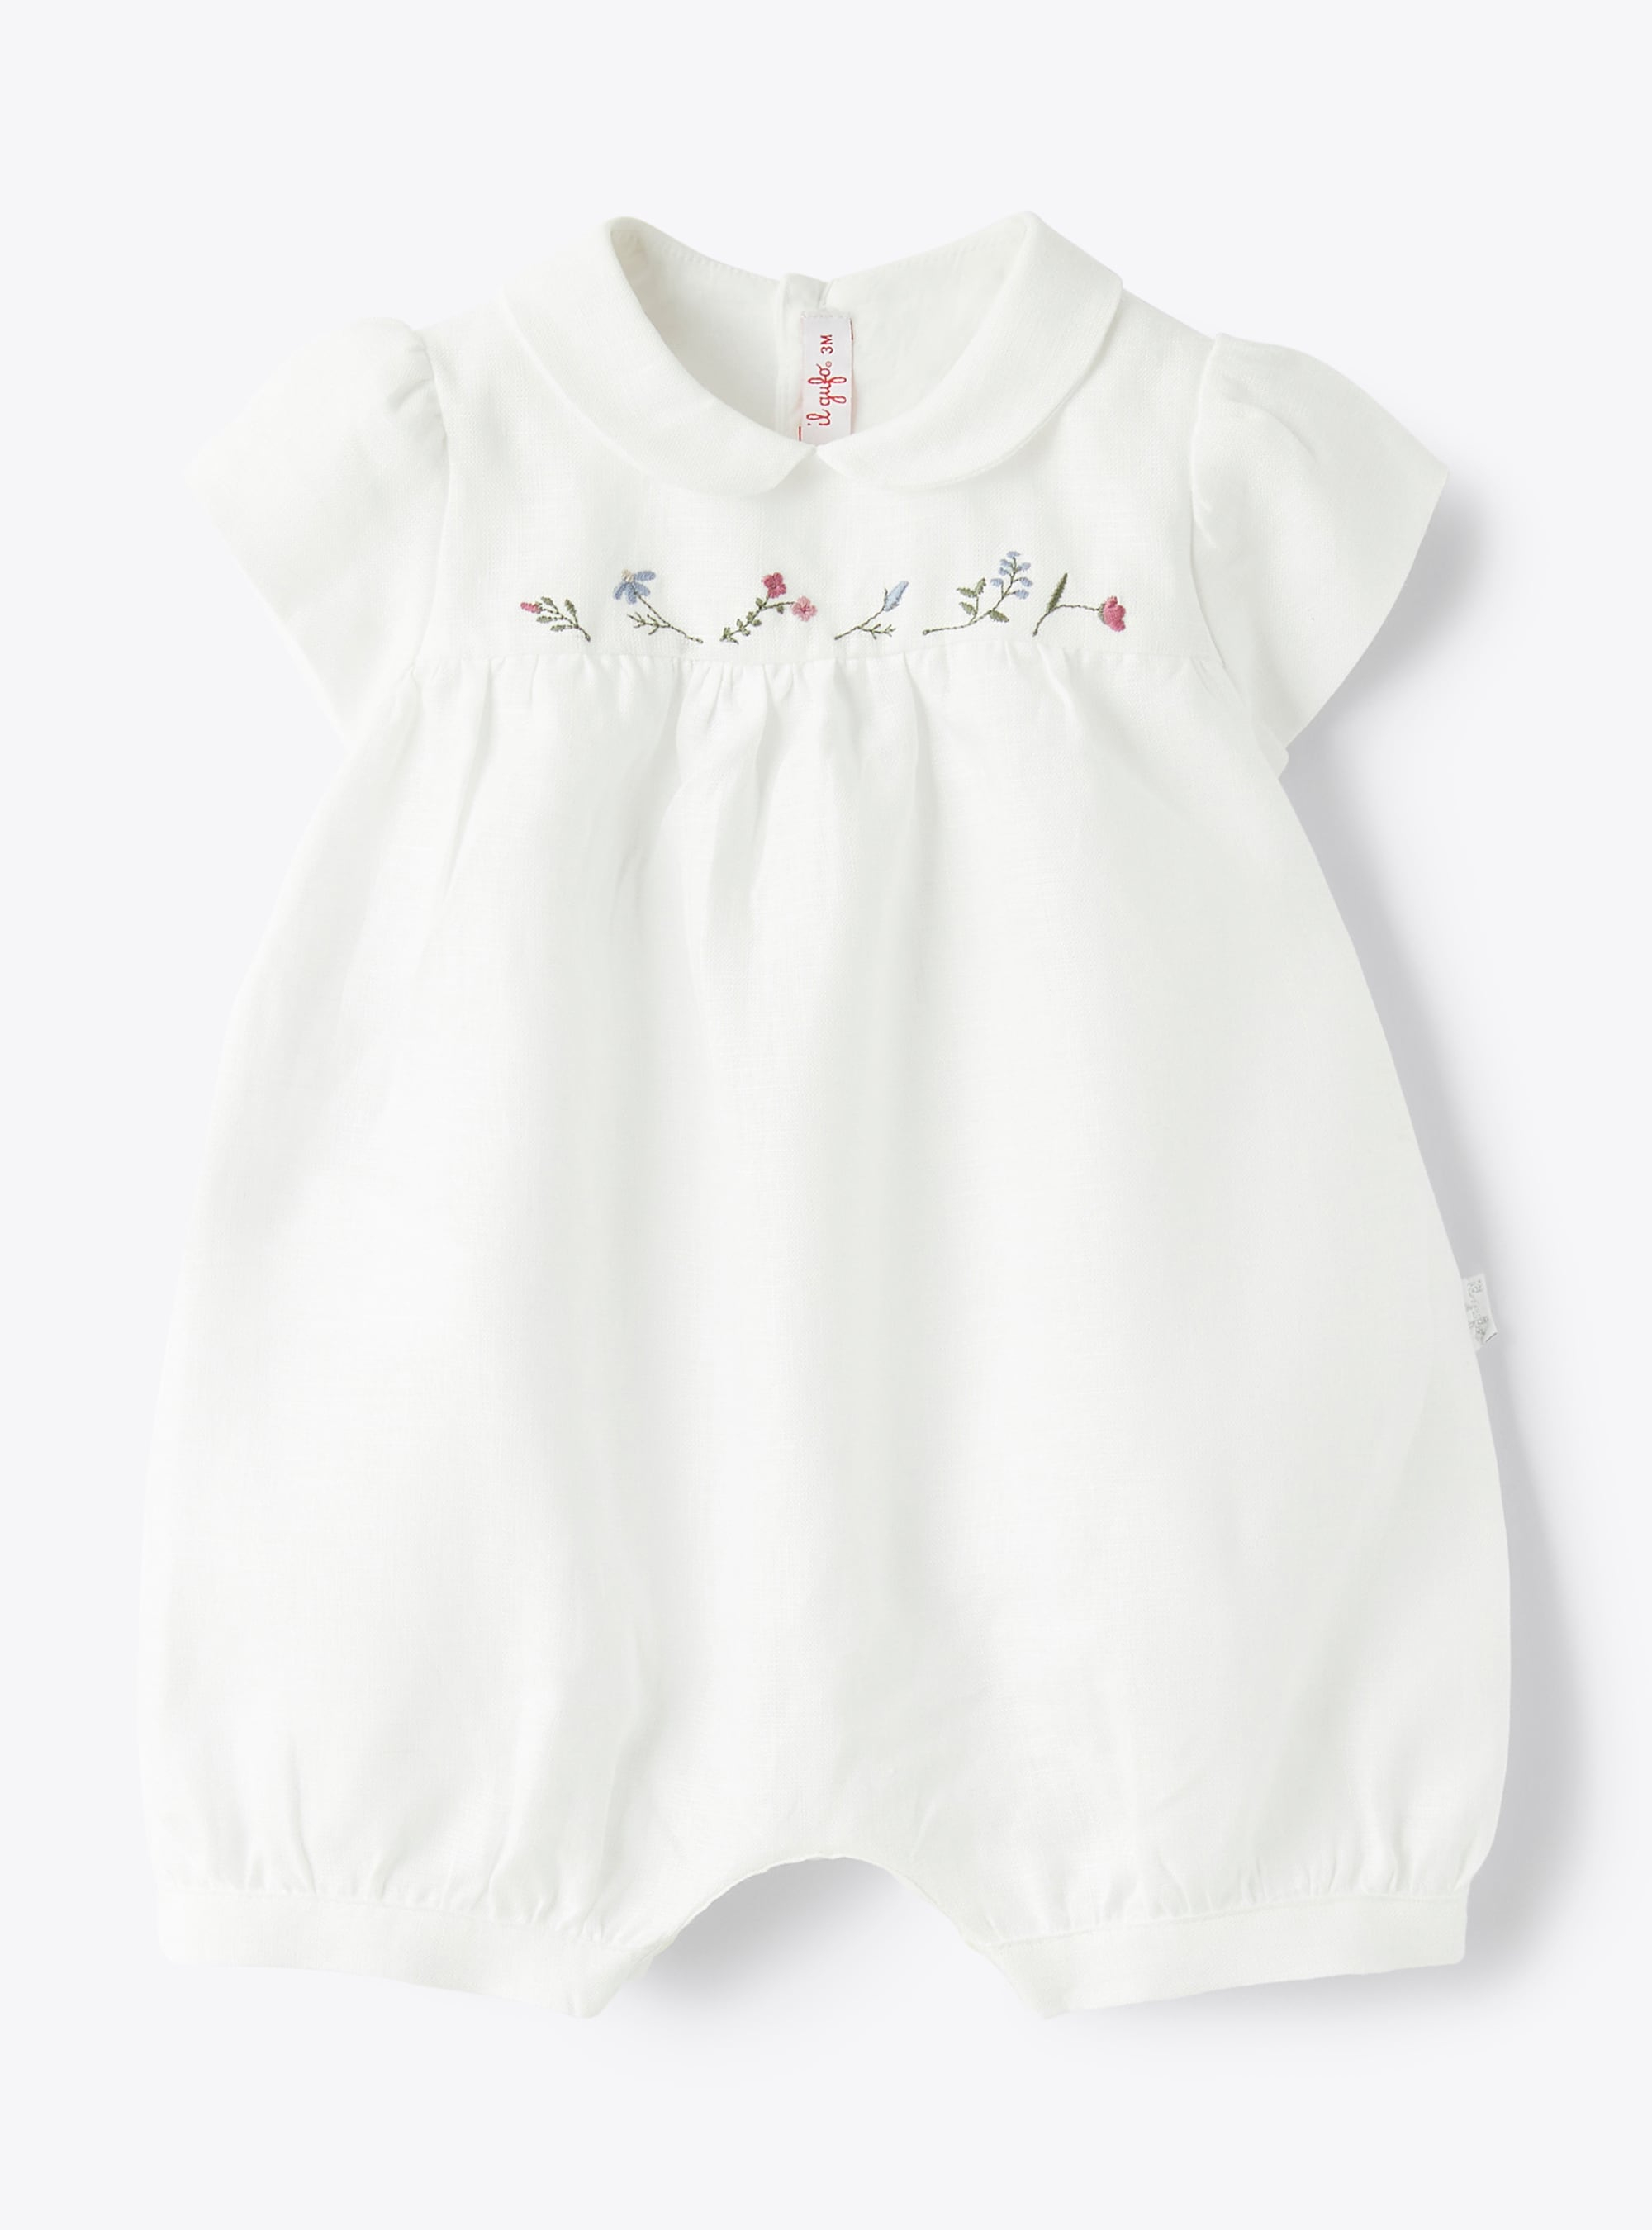 Romper suit in linen with floral embroidery - Babygrows - Il Gufo